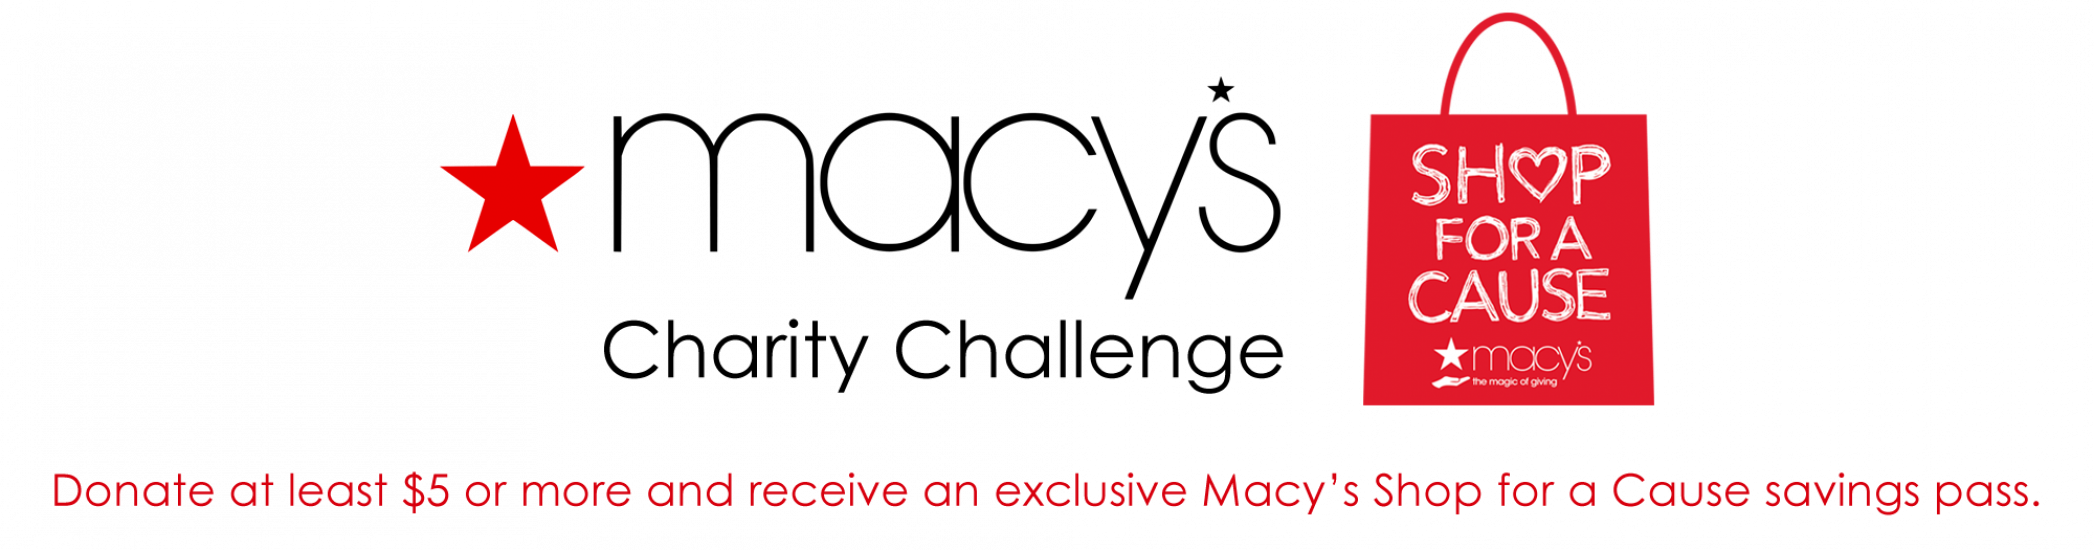 Macy's Shop For A Cause Charity Challenge Fundraiser - Macy's Shop For A Cause 2017 (2094x550), Png Download